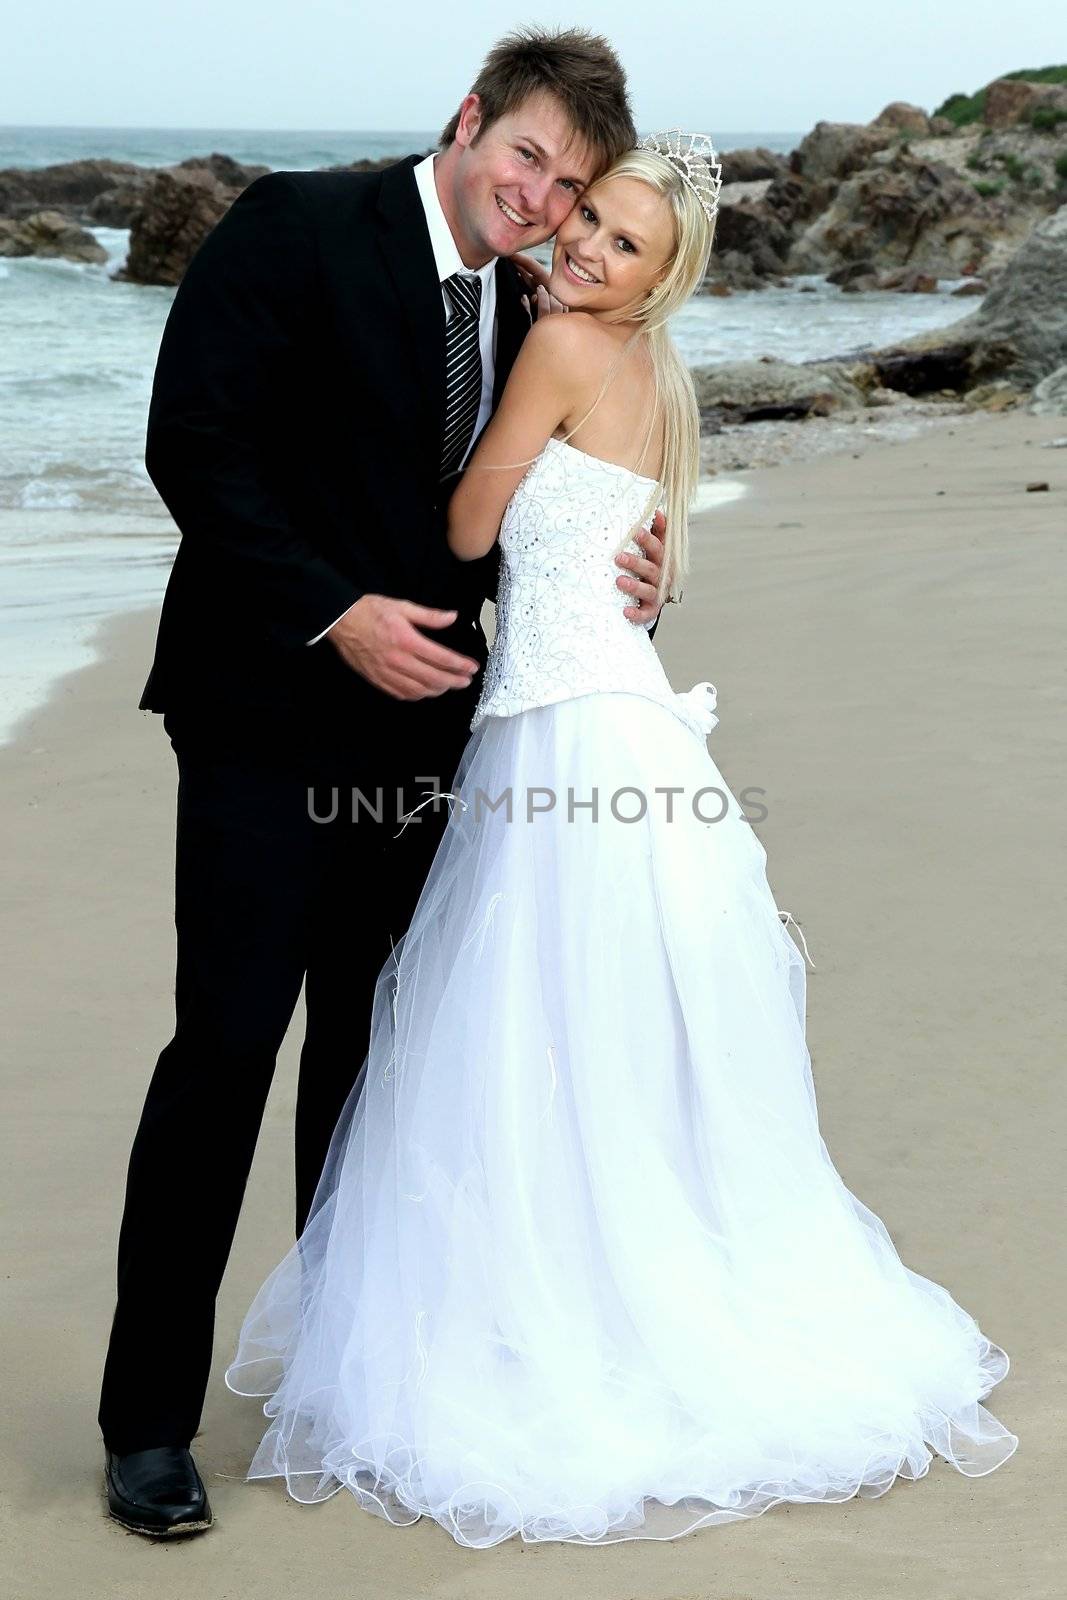 Pretty blond bride and her handsome groom at the sea shore